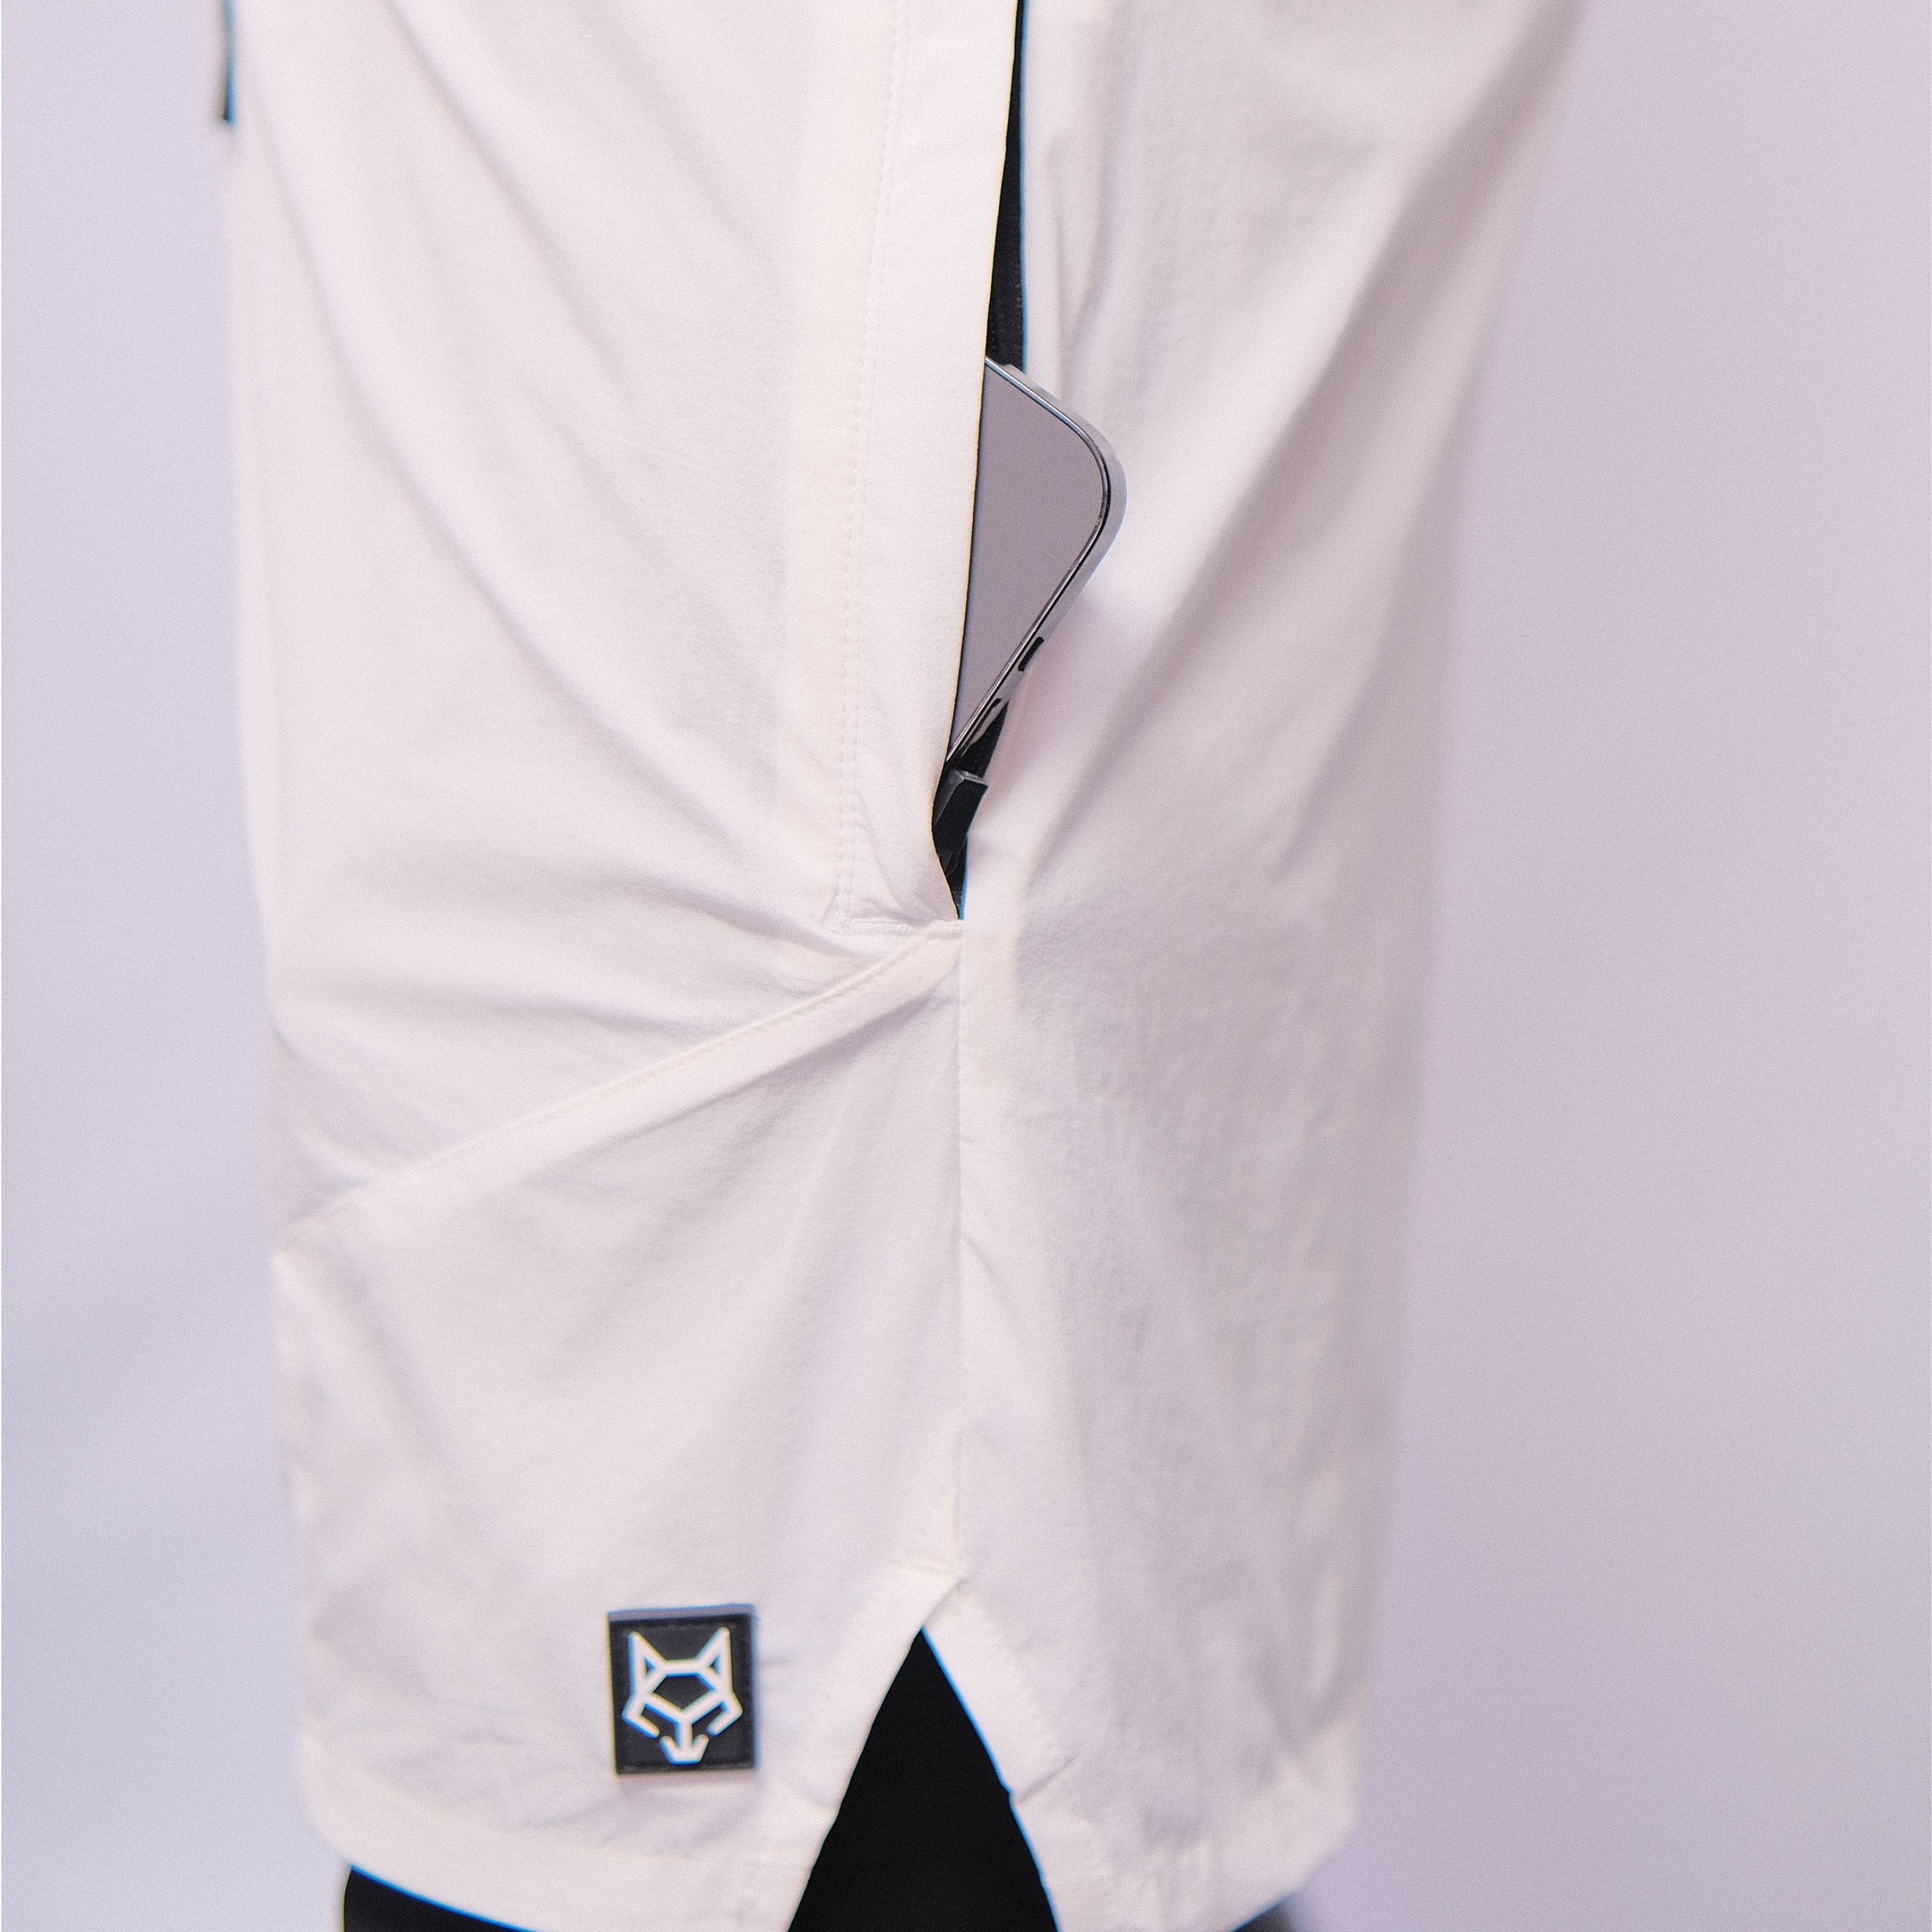 Men's Nylon Shorts - White with Spandex with 2 hidden pockets - 002